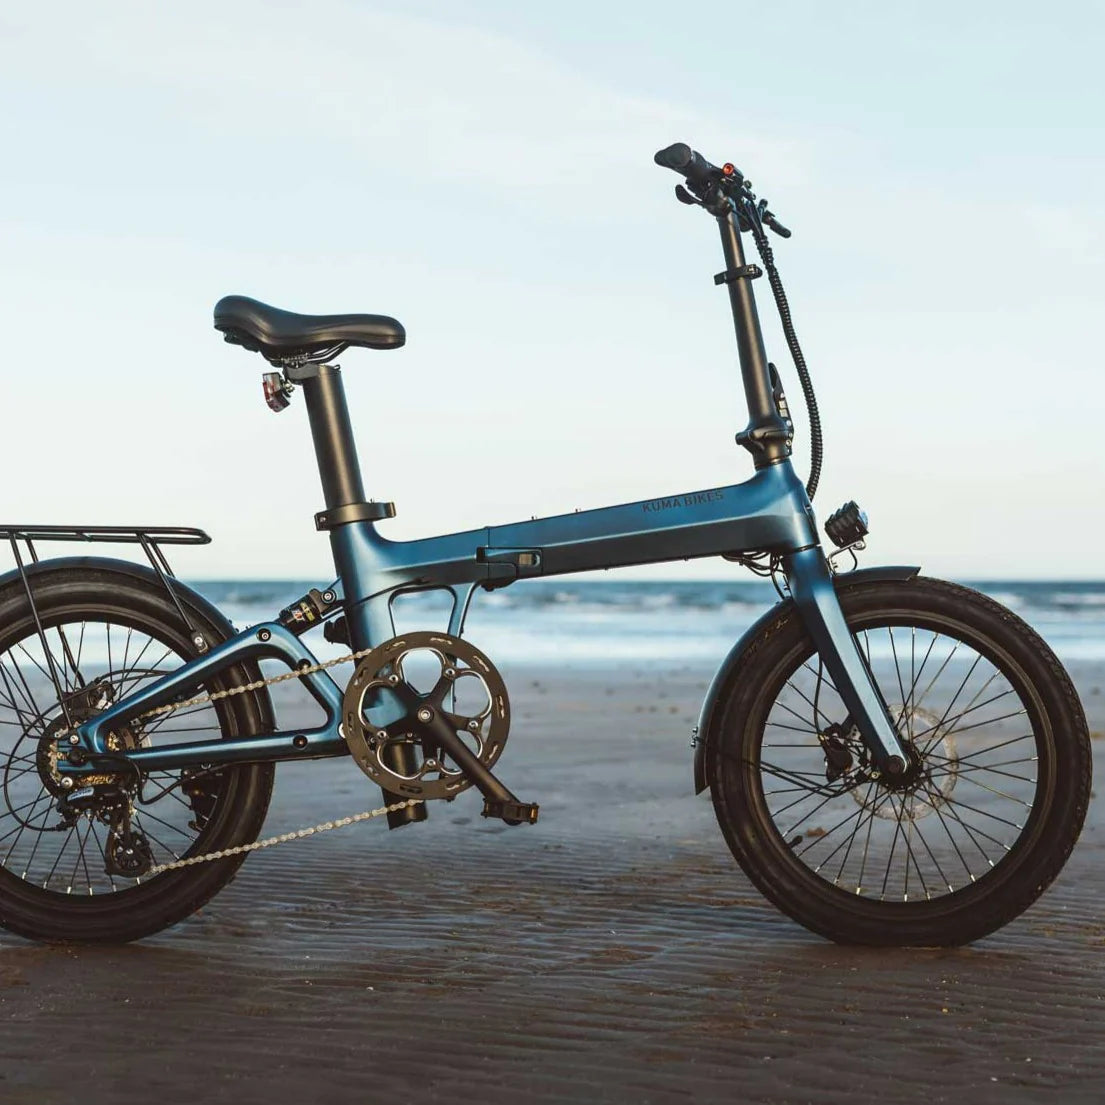 A photo of the Kuma F1 folding electric bike taken on a beach with the sea in the background. The light shows up the Matt Ocean Blue frame colour. The Kuma F1 is available to buy from Bleeper.